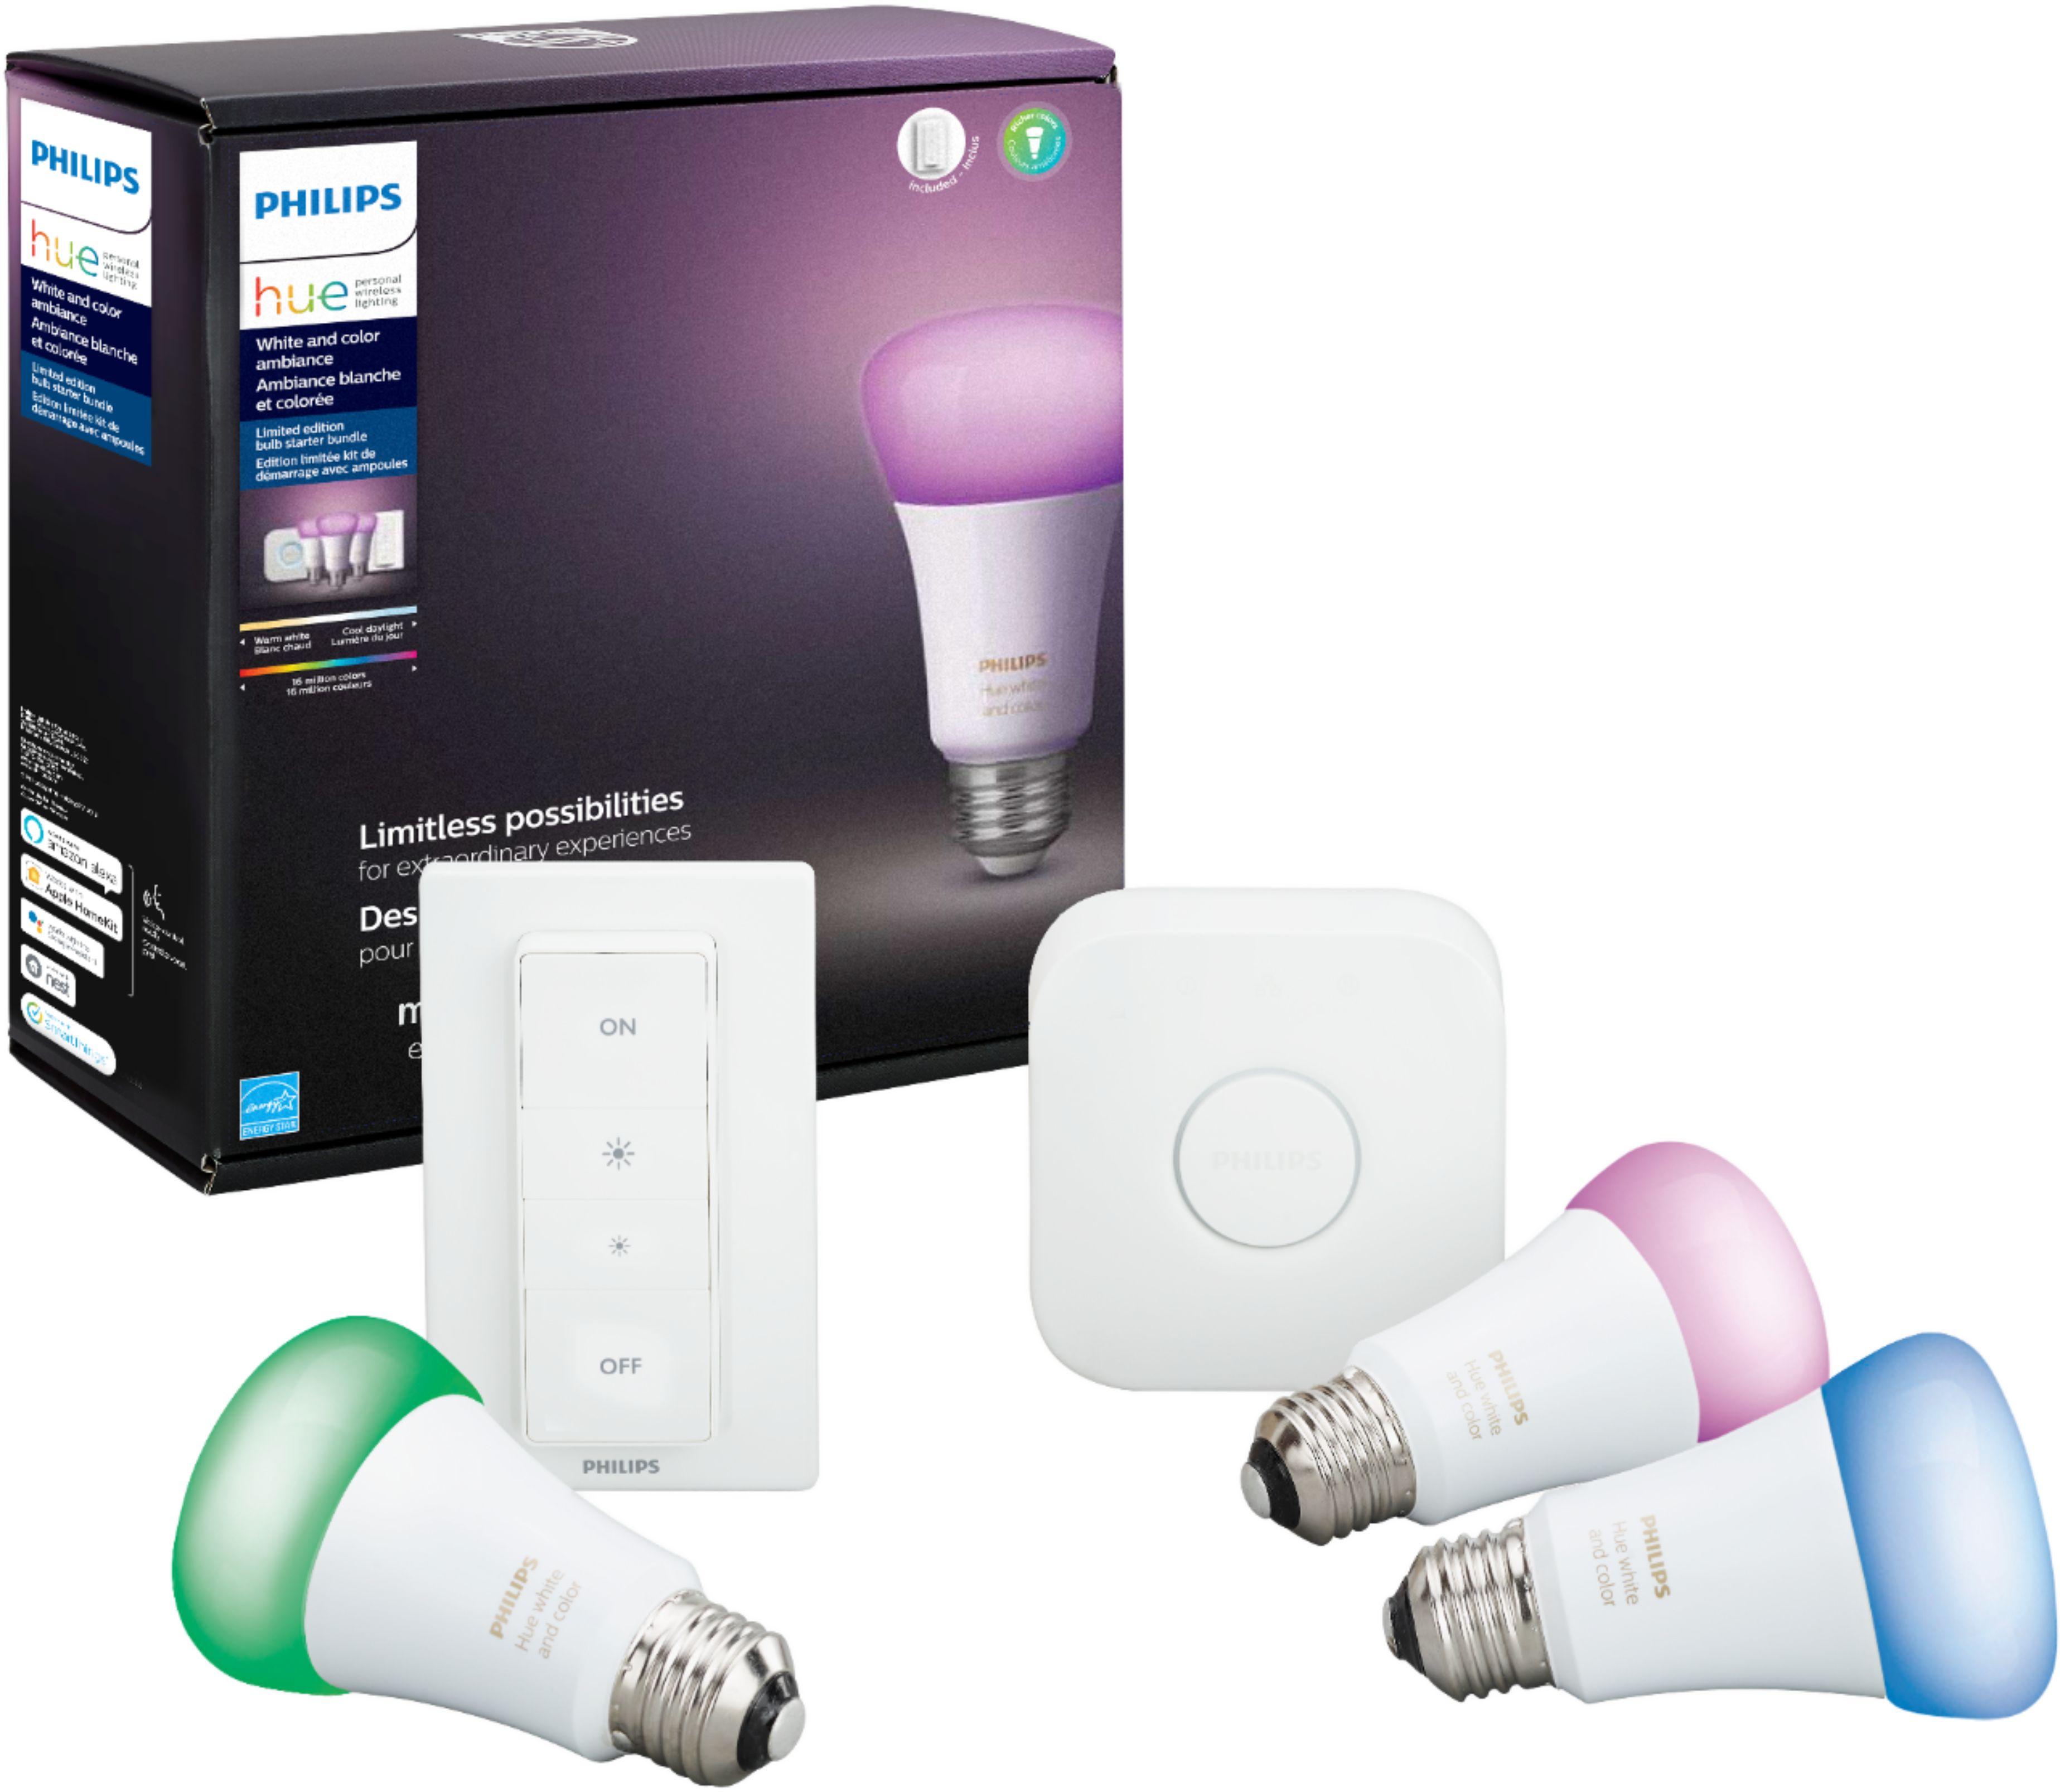 3-Bulb Philips Hue White & Color Ambiance A19 LED Starter Kit for $79.99 Shipped